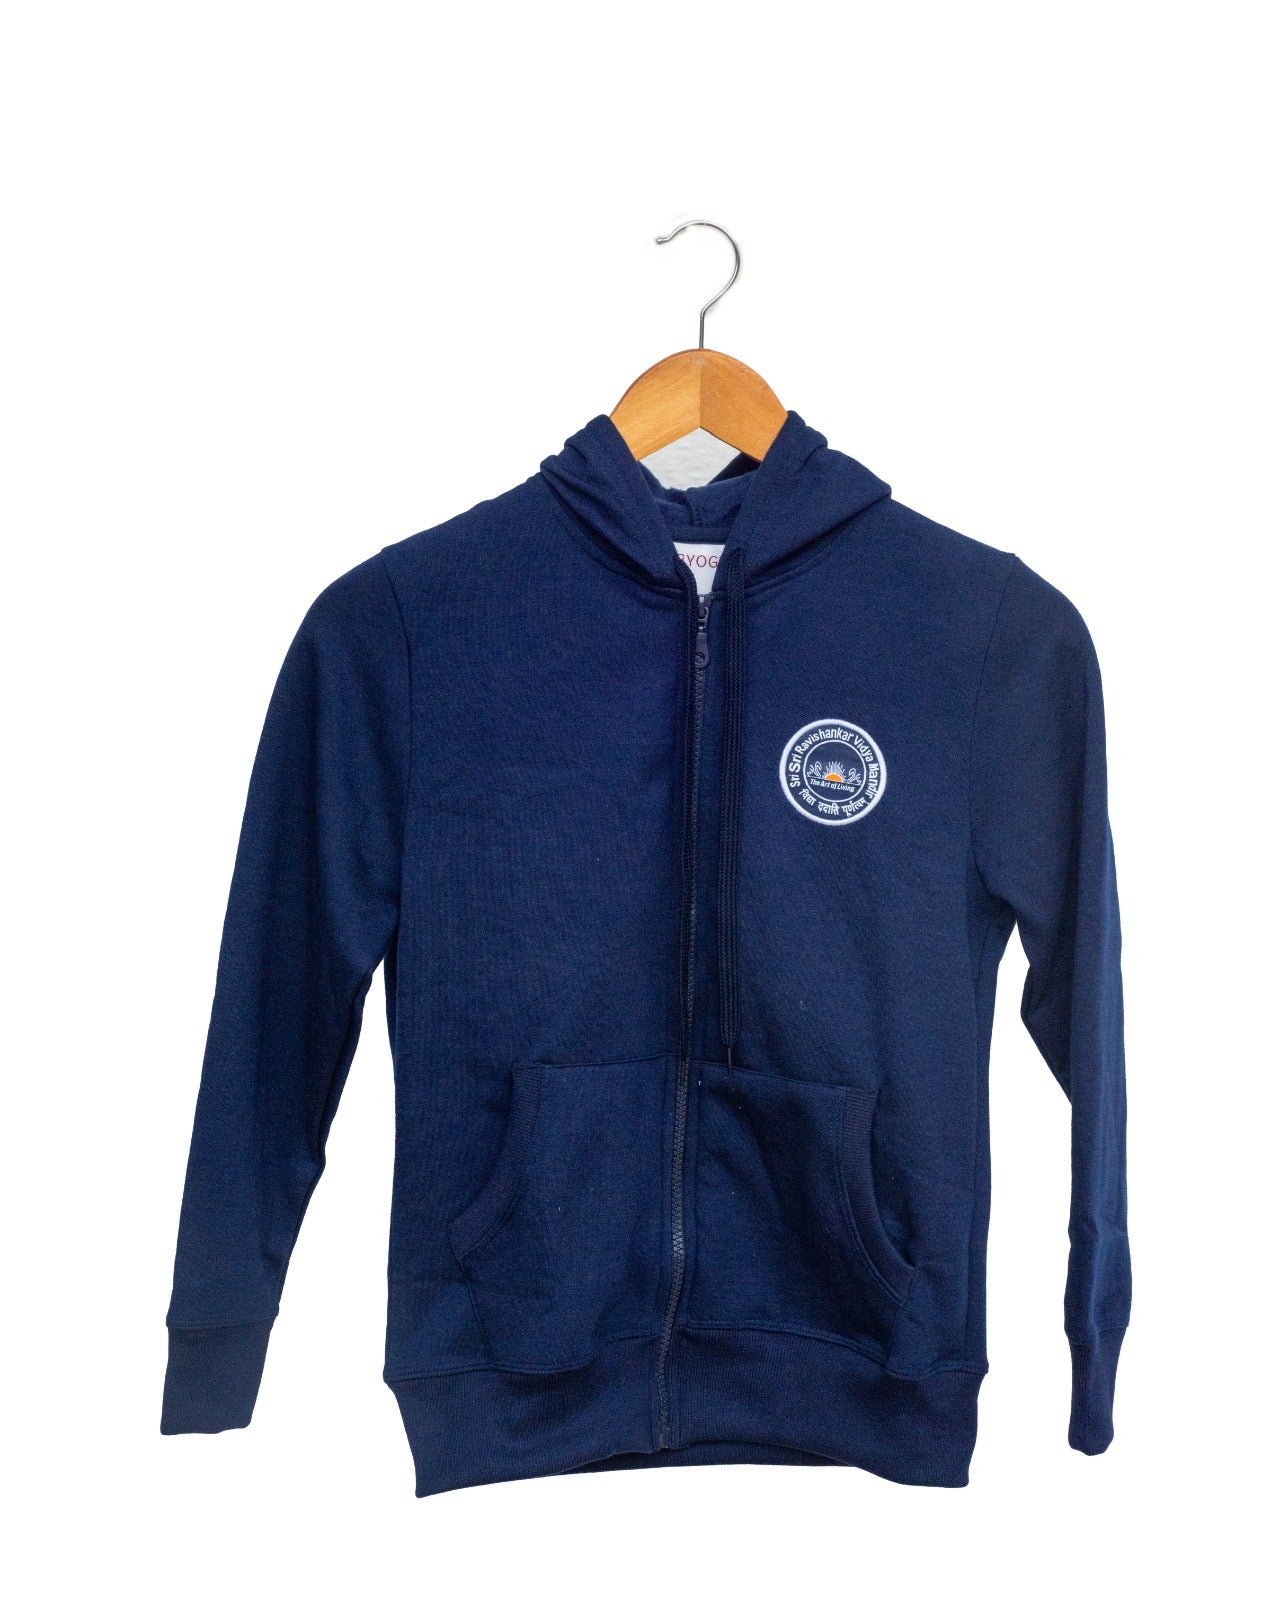 Hoodie Jacket Boys and Girls- PP1 To 2nd Std.